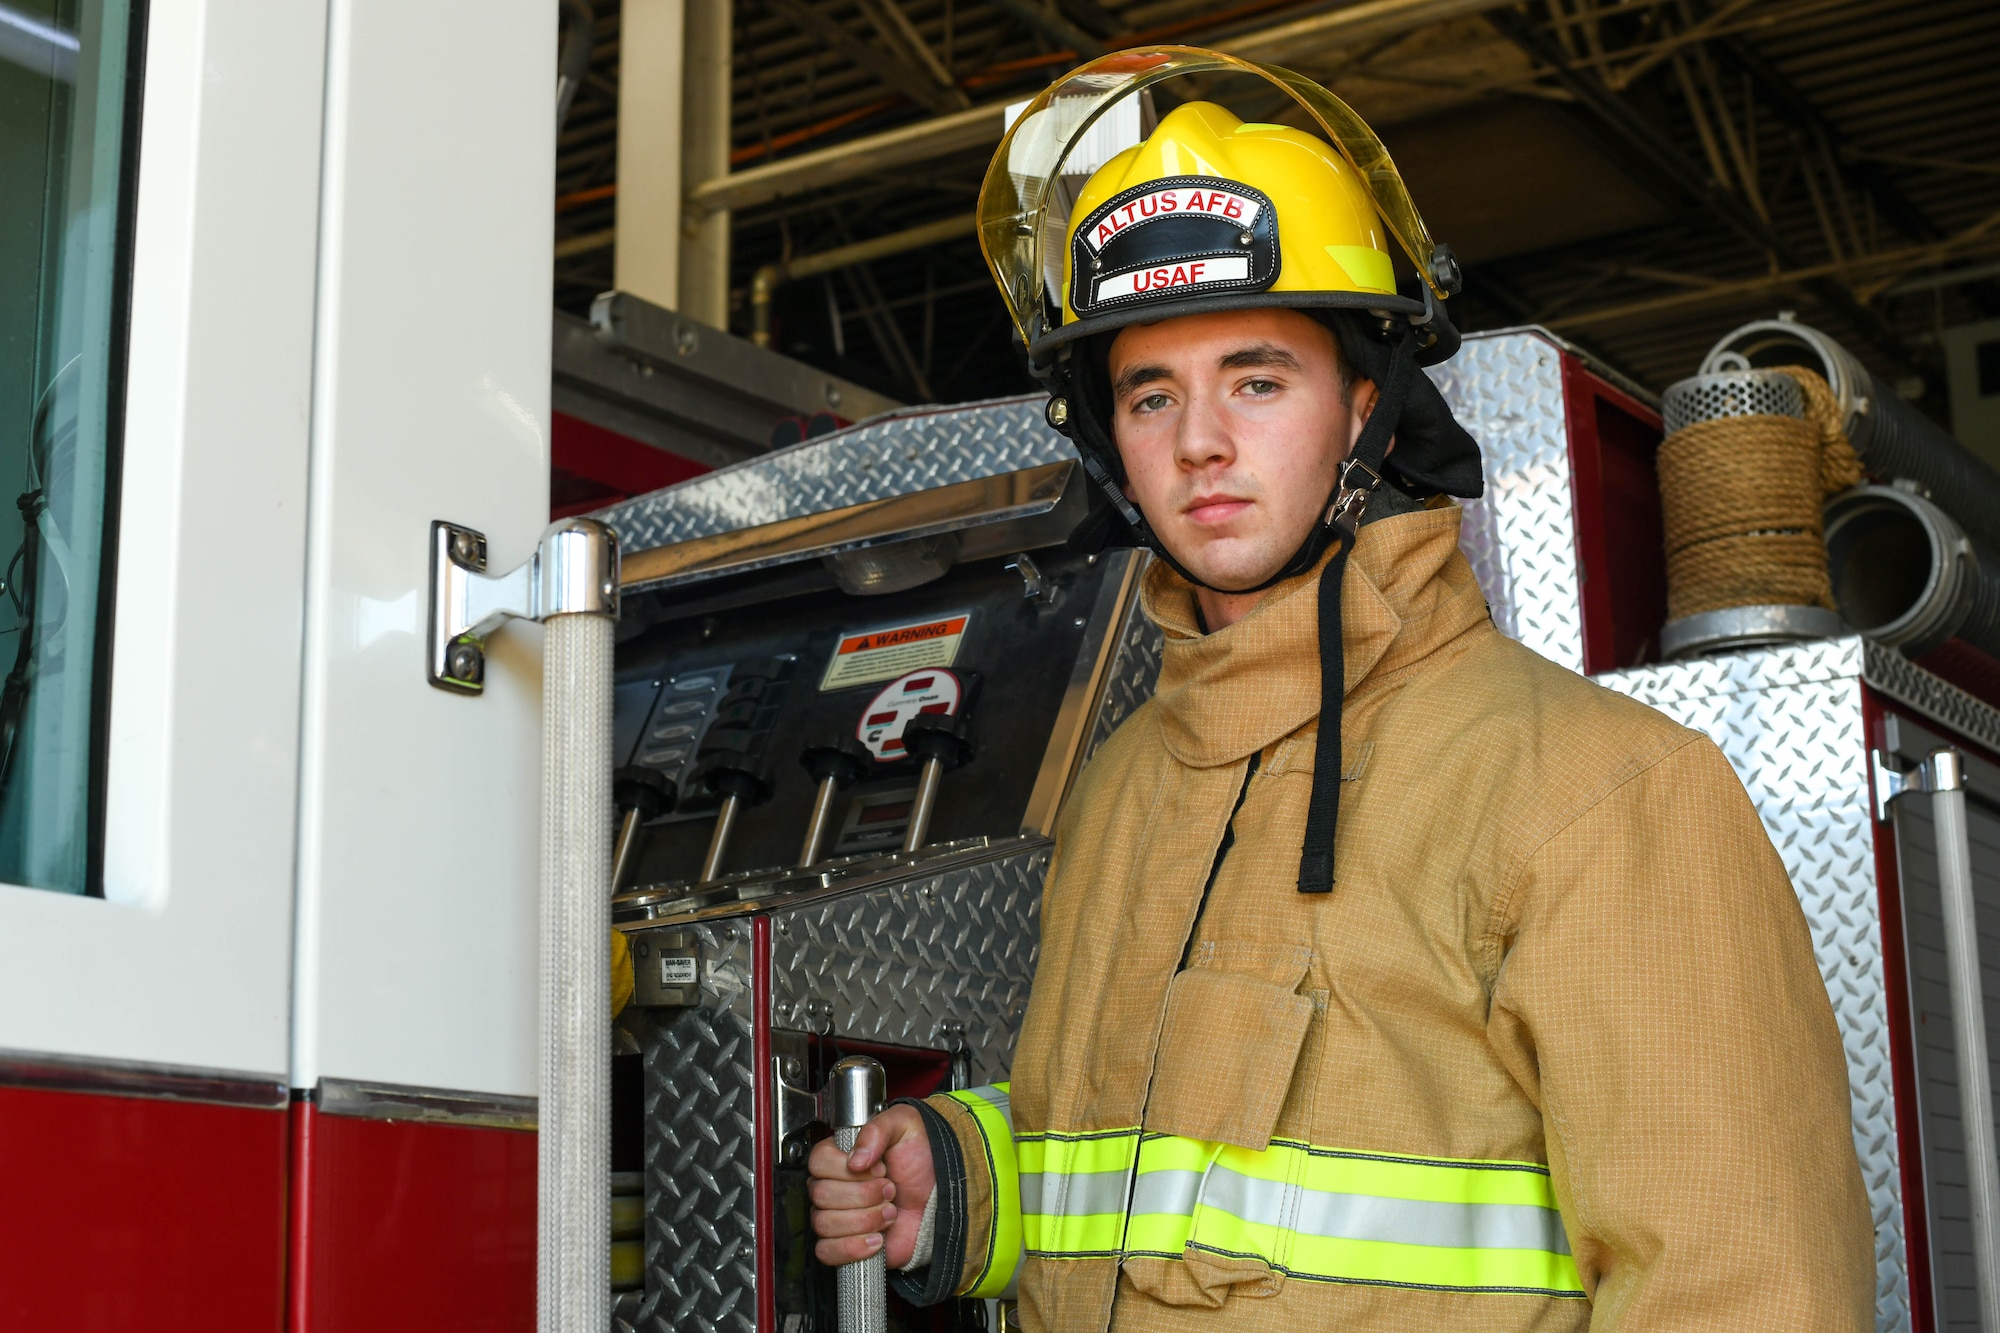 U.S. Air Force Airman 1st Class Joseph Coveney, 97th Civil Engineer Squadron (CES) fire prevention specialist, poses on Engine 11 at the fire department on Altus Air Force Base, Oklahoma, Oct. 4, 2021. The 97th CES Fire and Emergency Services Flight has more than 70 full time and part time staff. (U.S. Air Force photo by Airman 1st Class Trenton Jancze)